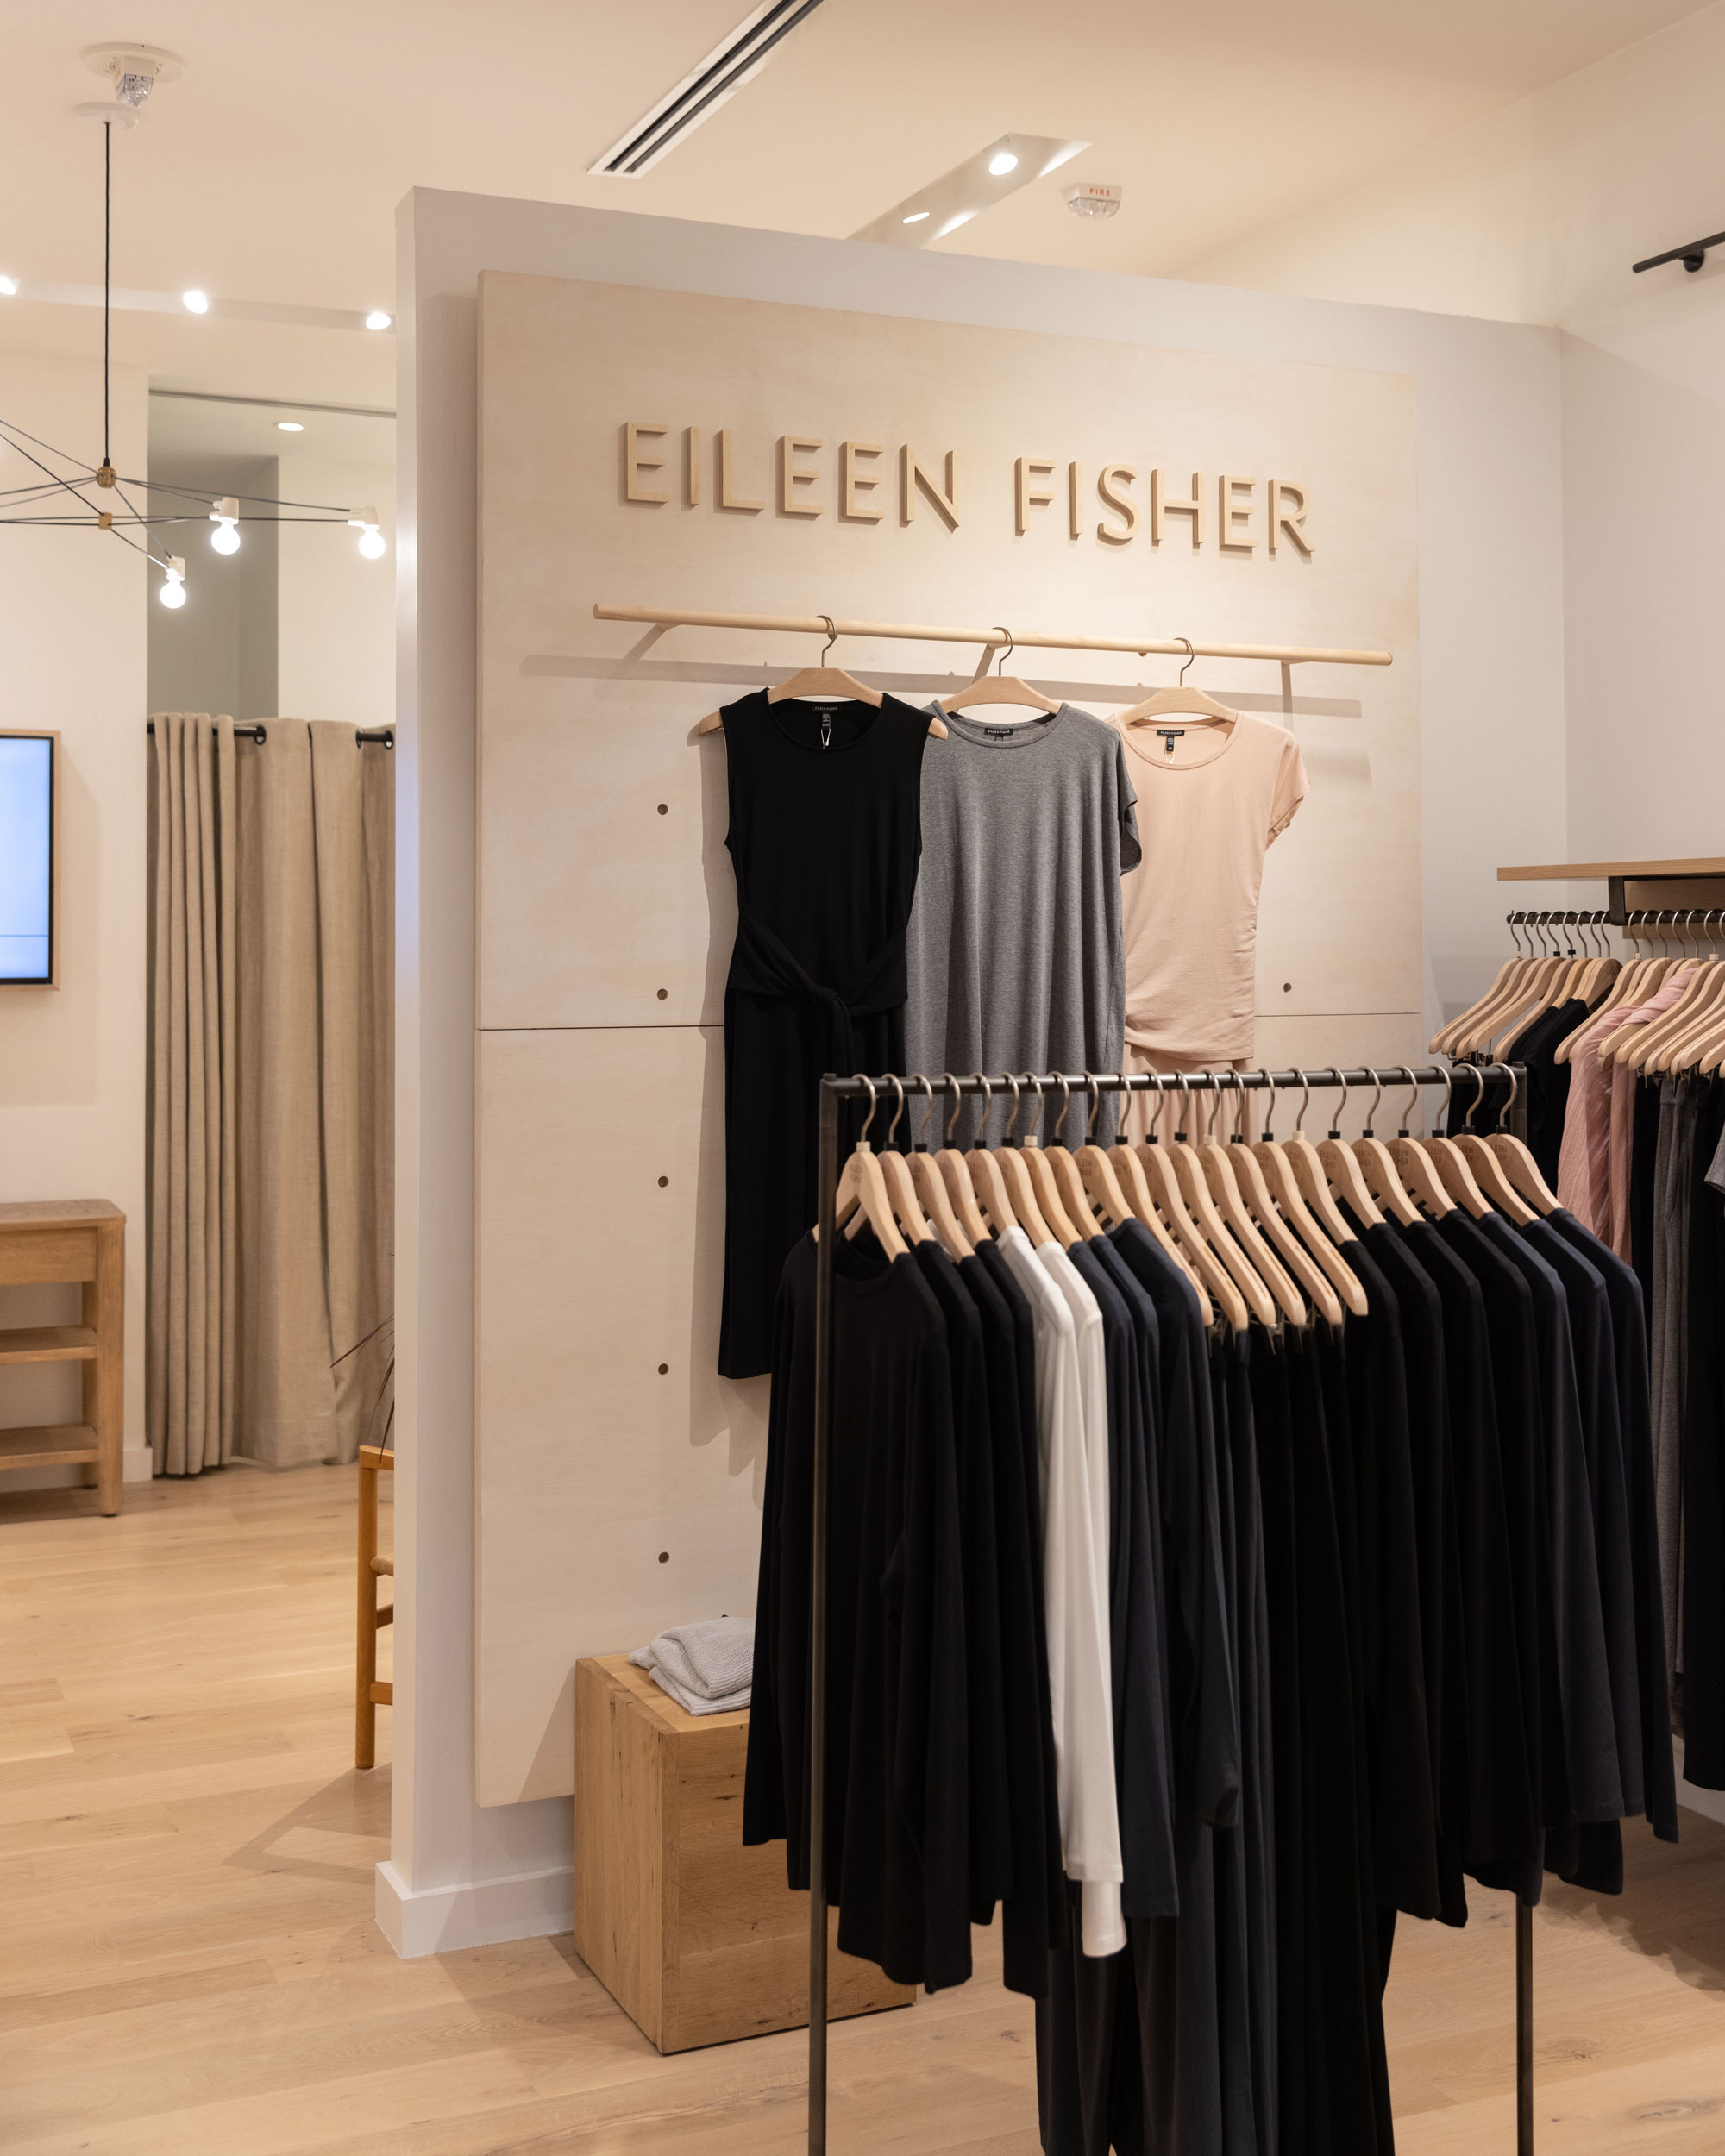 A New Eileen Fisher